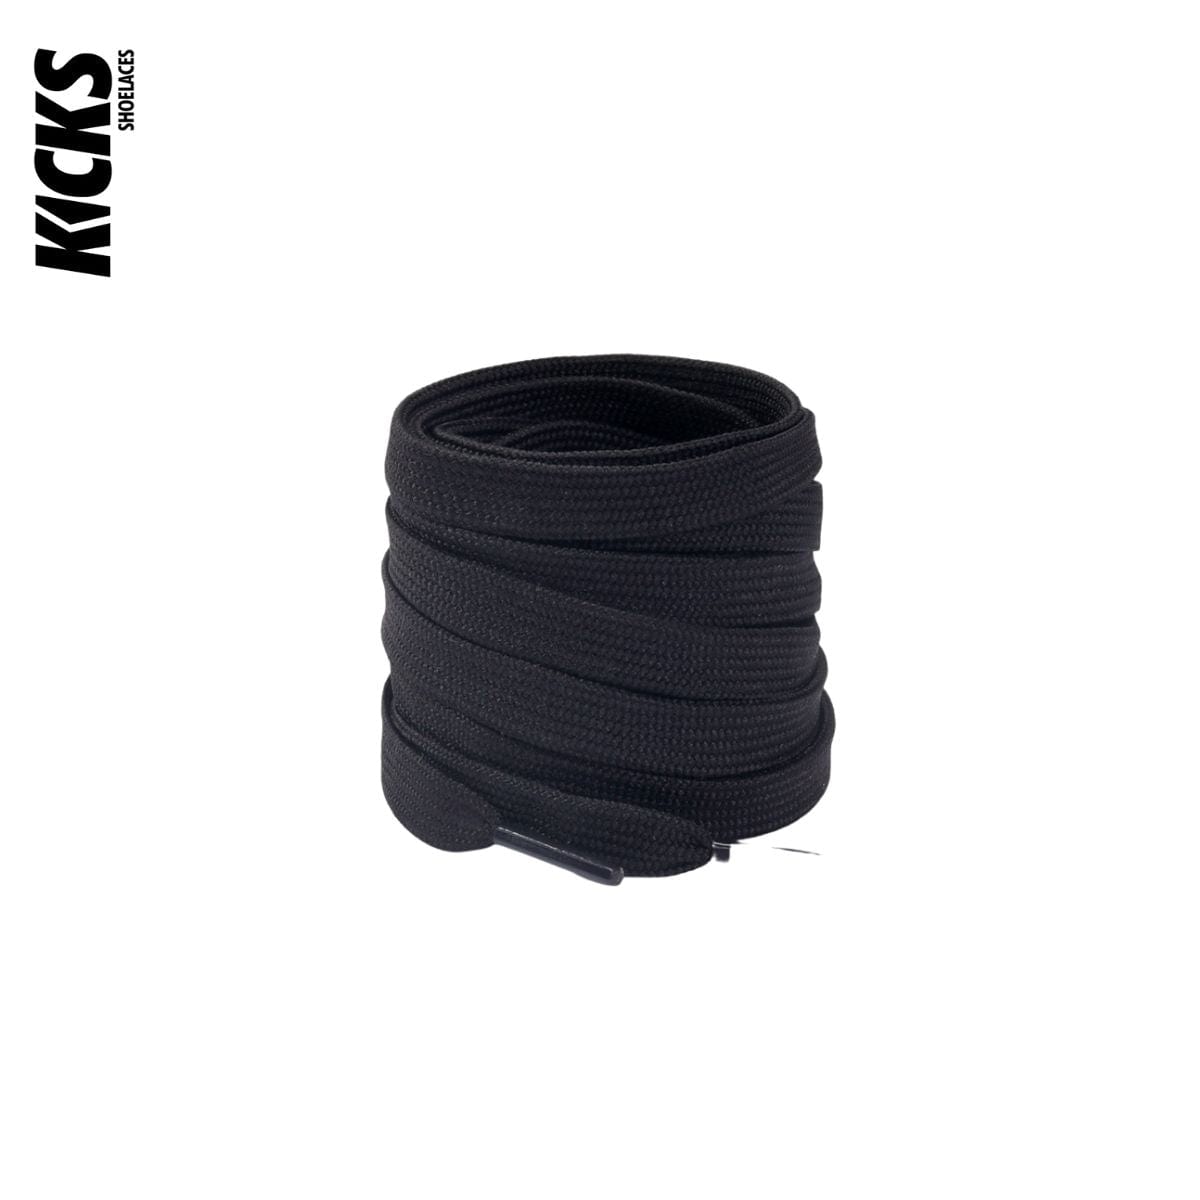 Black Replacement Laces for Adidas EQT Sneakers by Kicks Shoelaces